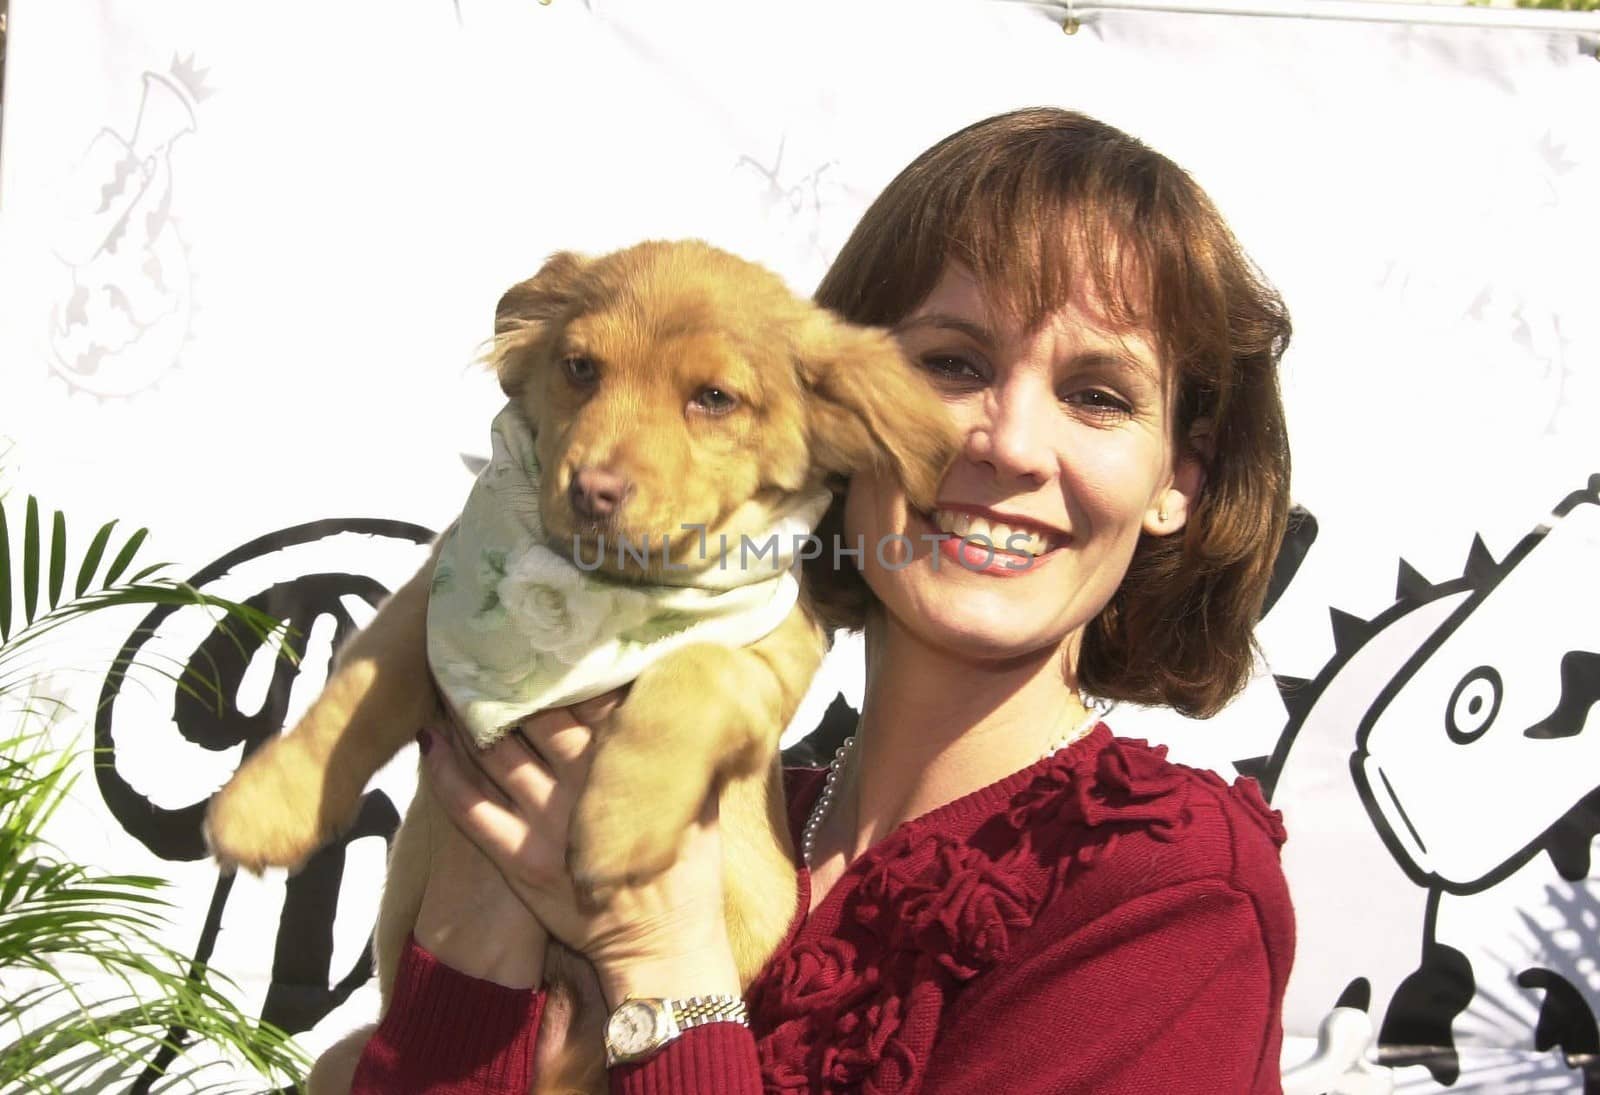 Teri Austin at the "Barqs On The Backlot" event sponsored by Barq's Rootbeer, where celebrities and their dogs are the stars. 02-12-00